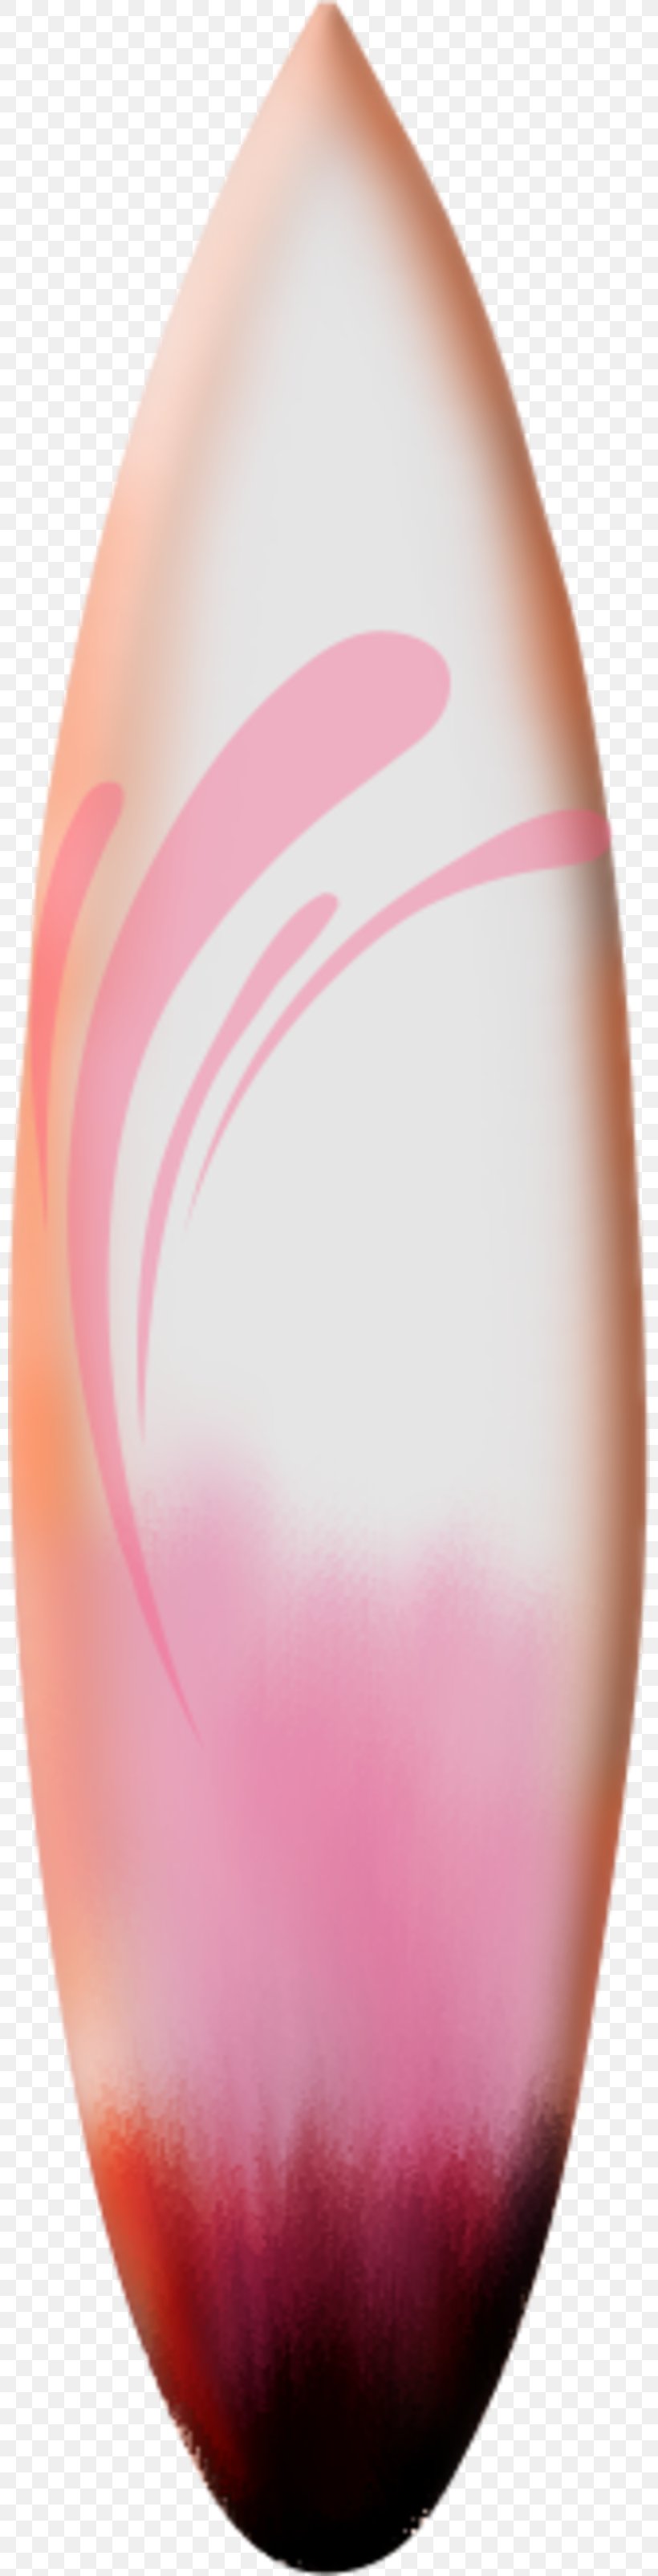 Surfboard Surfing Plank Egg, PNG, 800x3209px, Surfboard, Beach, Drawing, Egg, Magenta Download Free